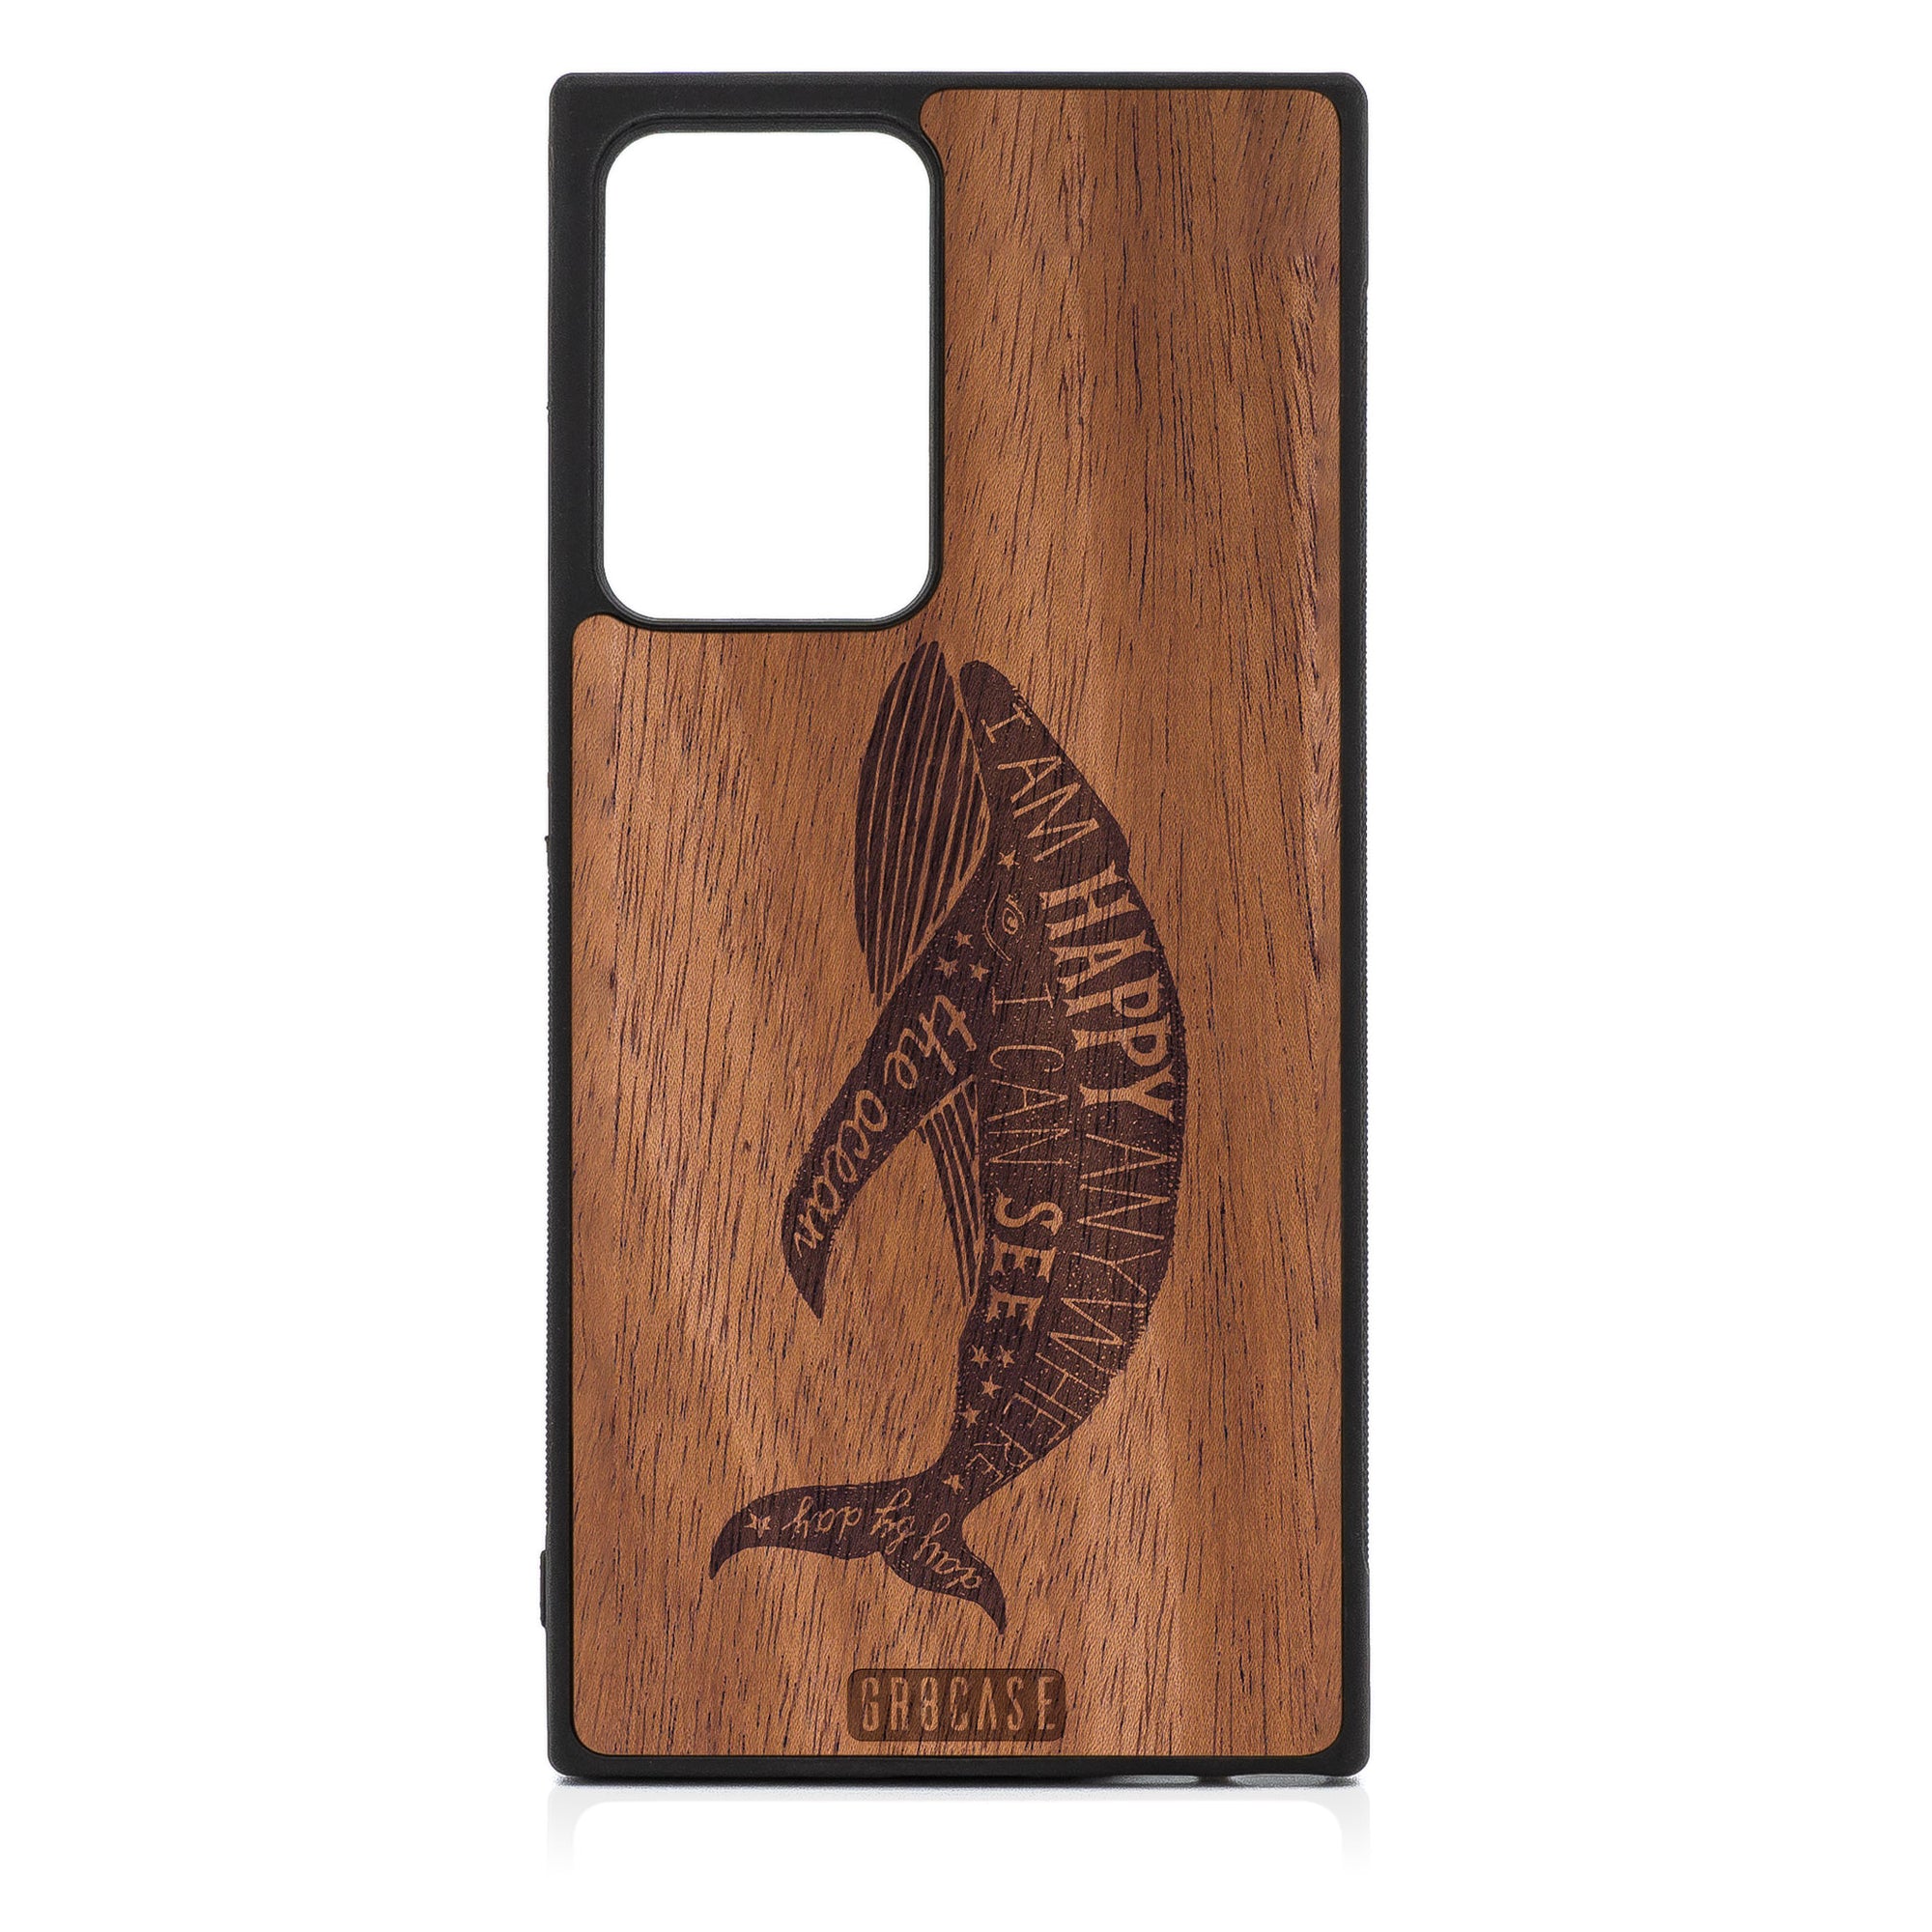 I'm Happy Anywhere I Can See The Ocean (Whale) Design Wood Case For Samsung Galaxy Note 20 Ultra